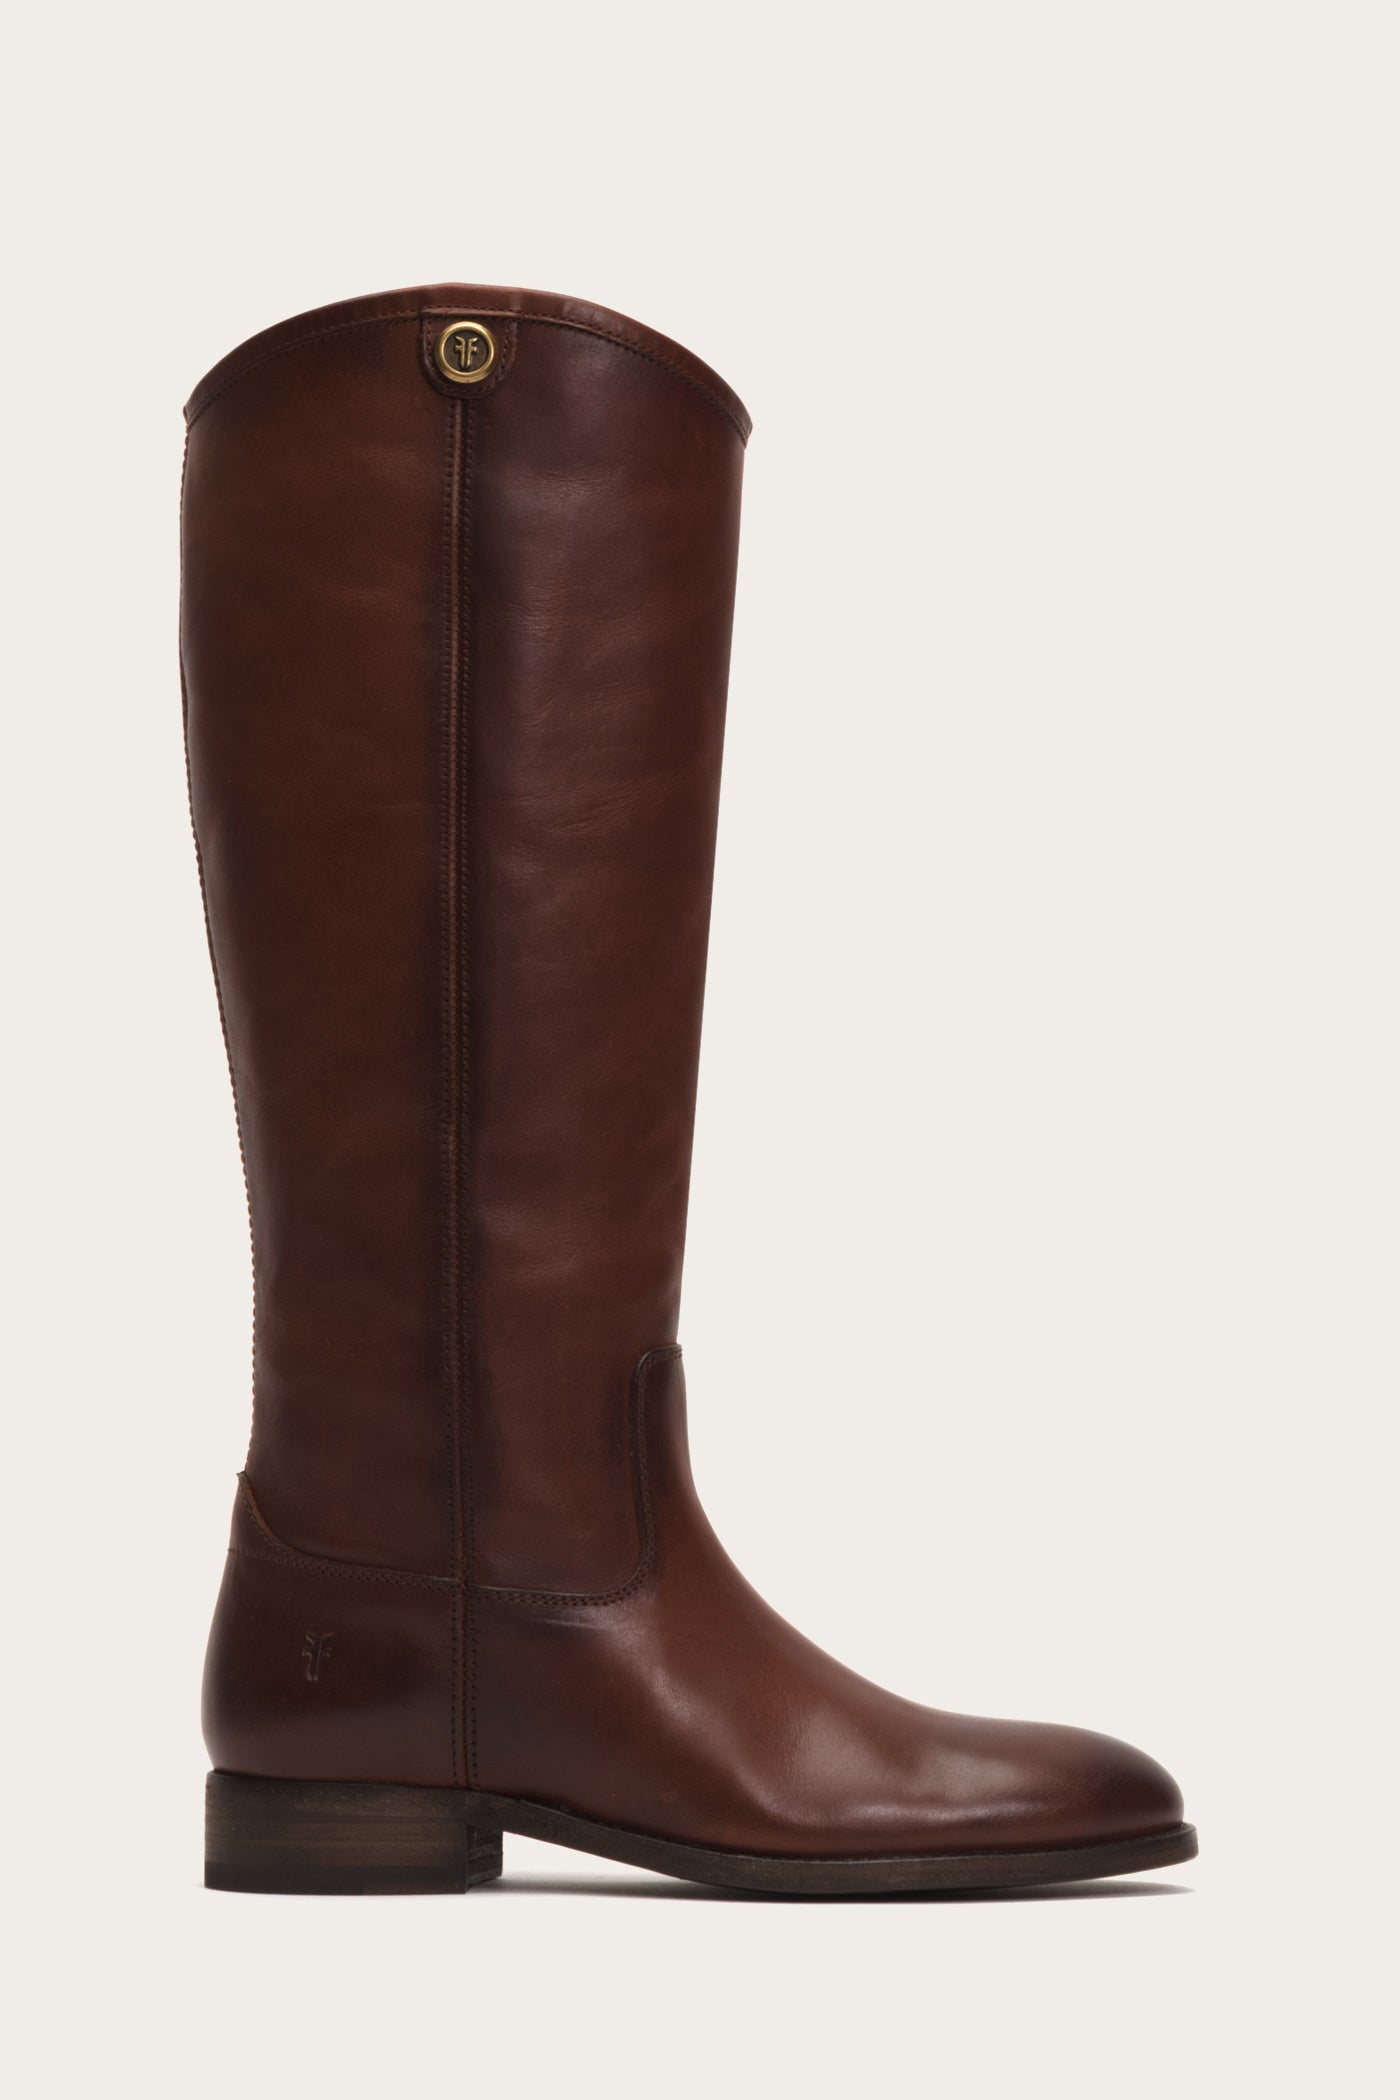 extra large calf womens boots